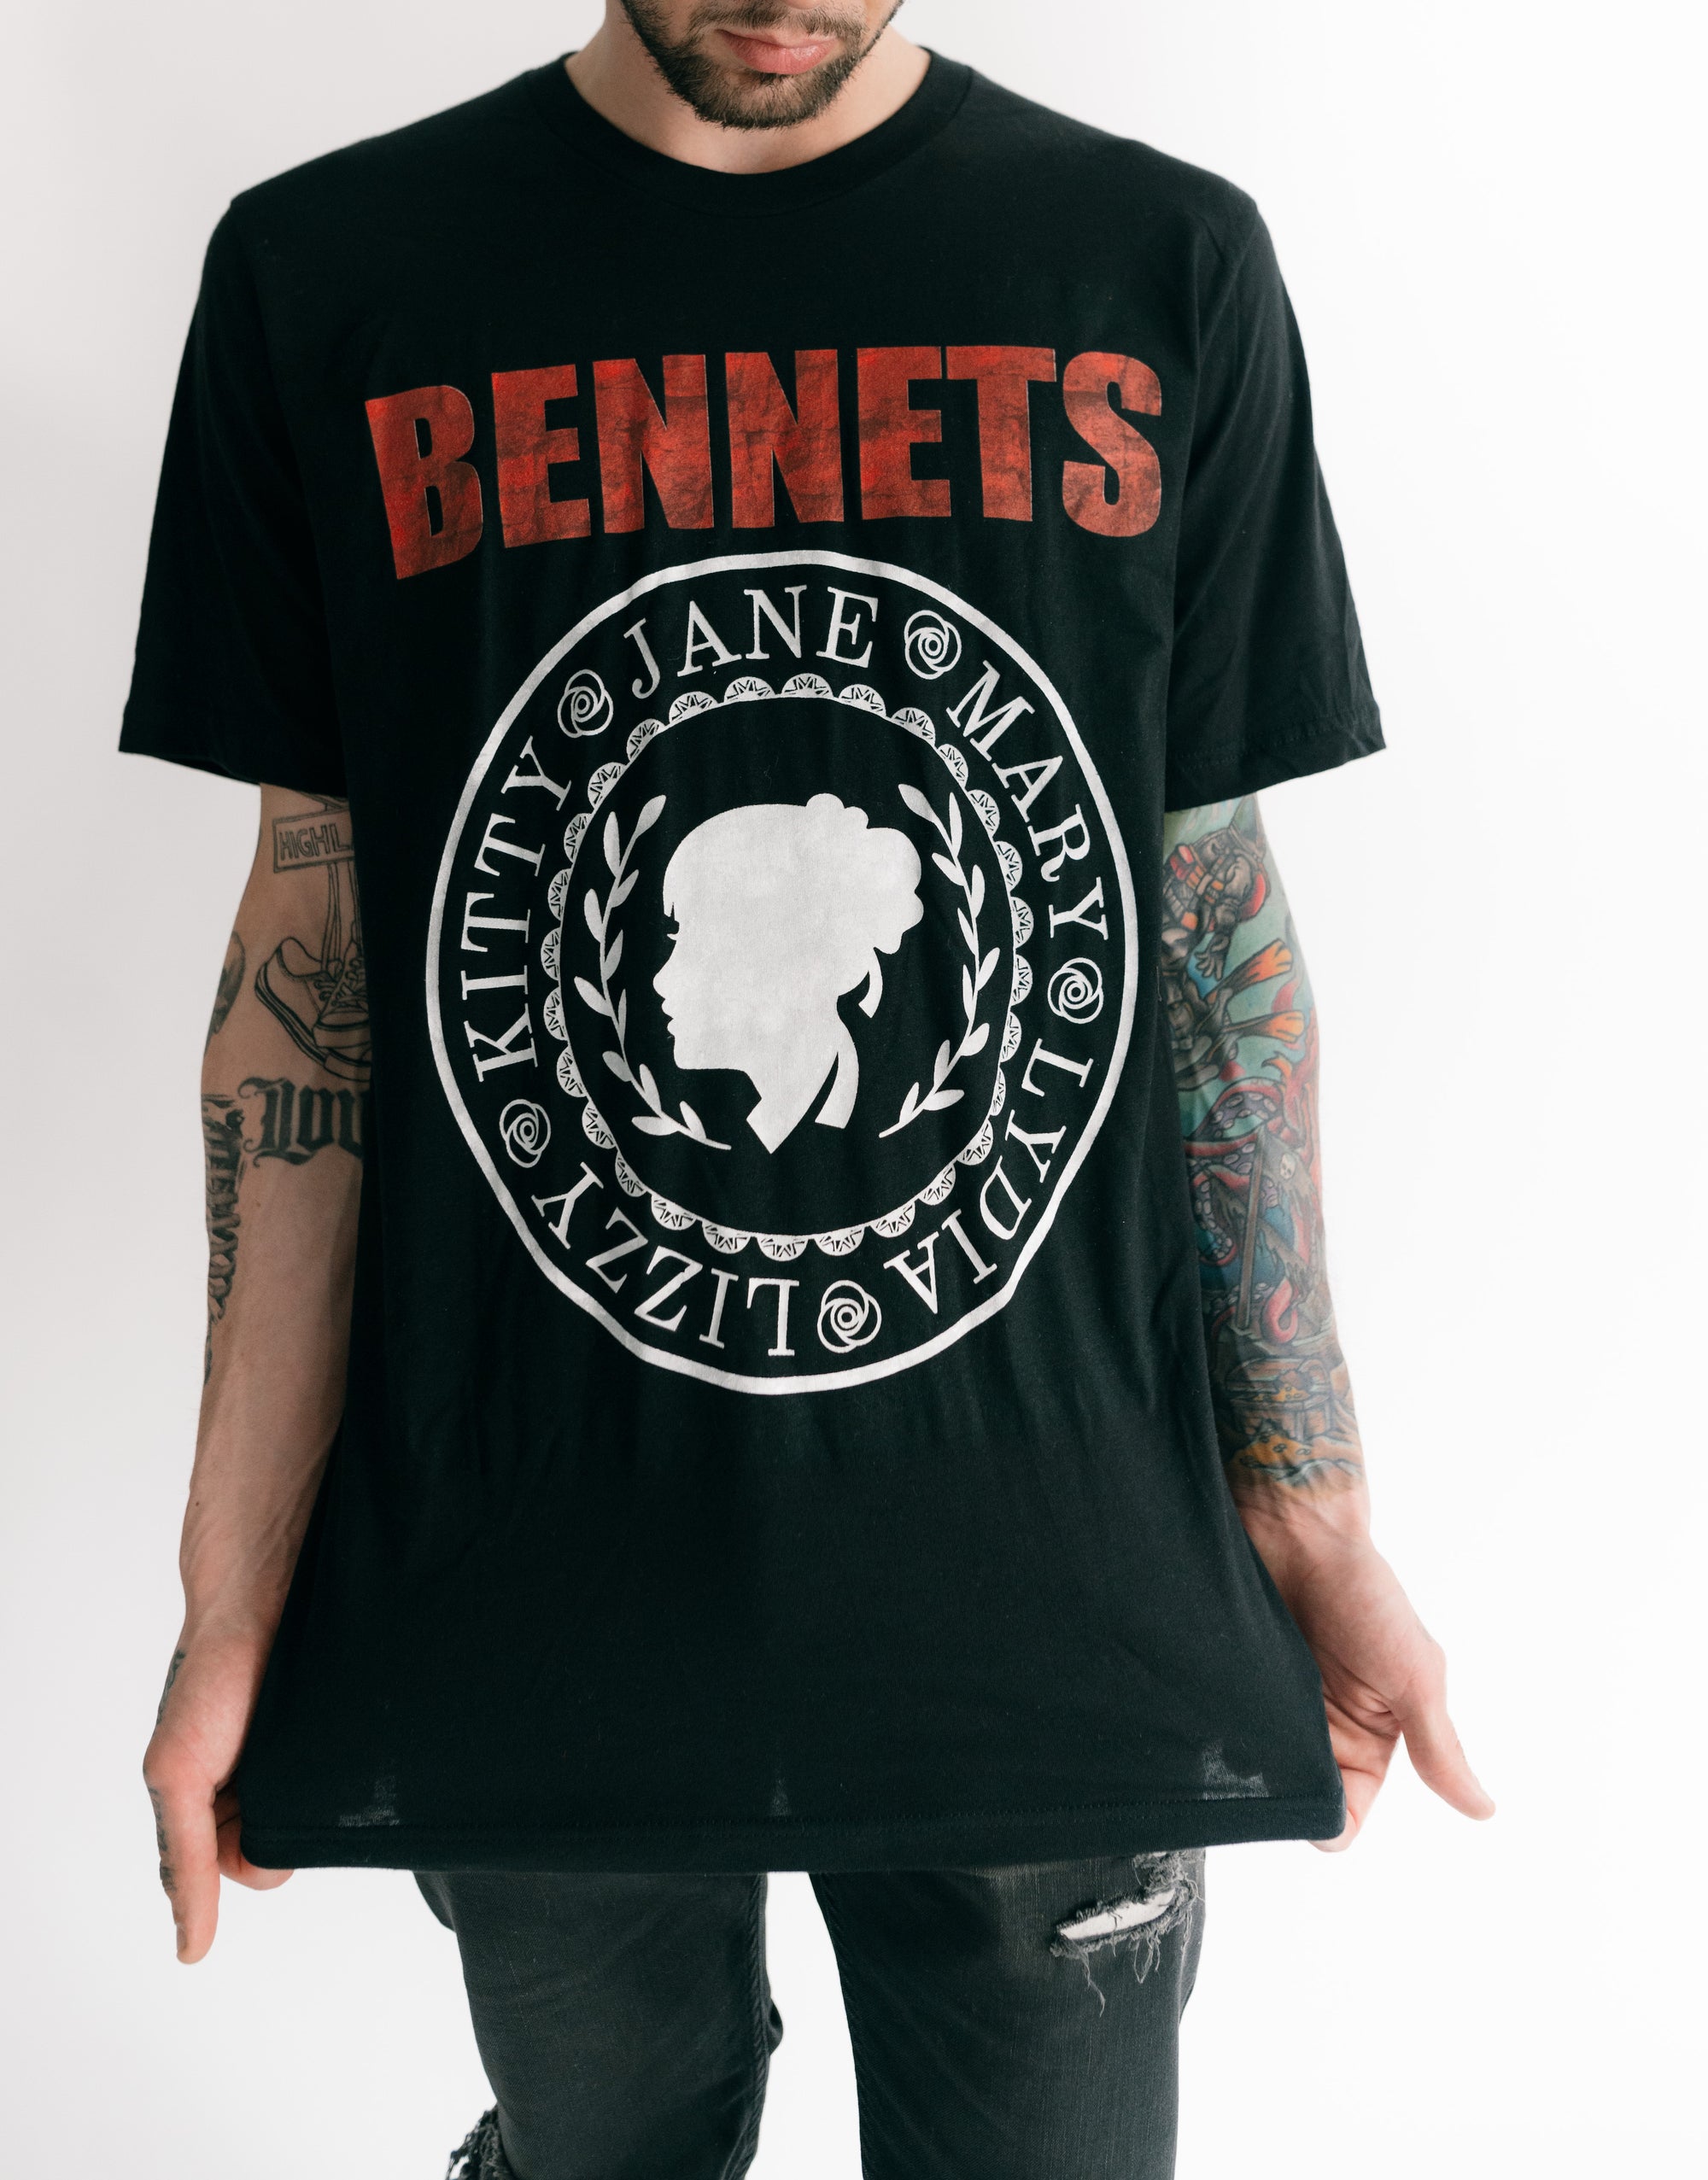 Bennet Sisters Band Tee